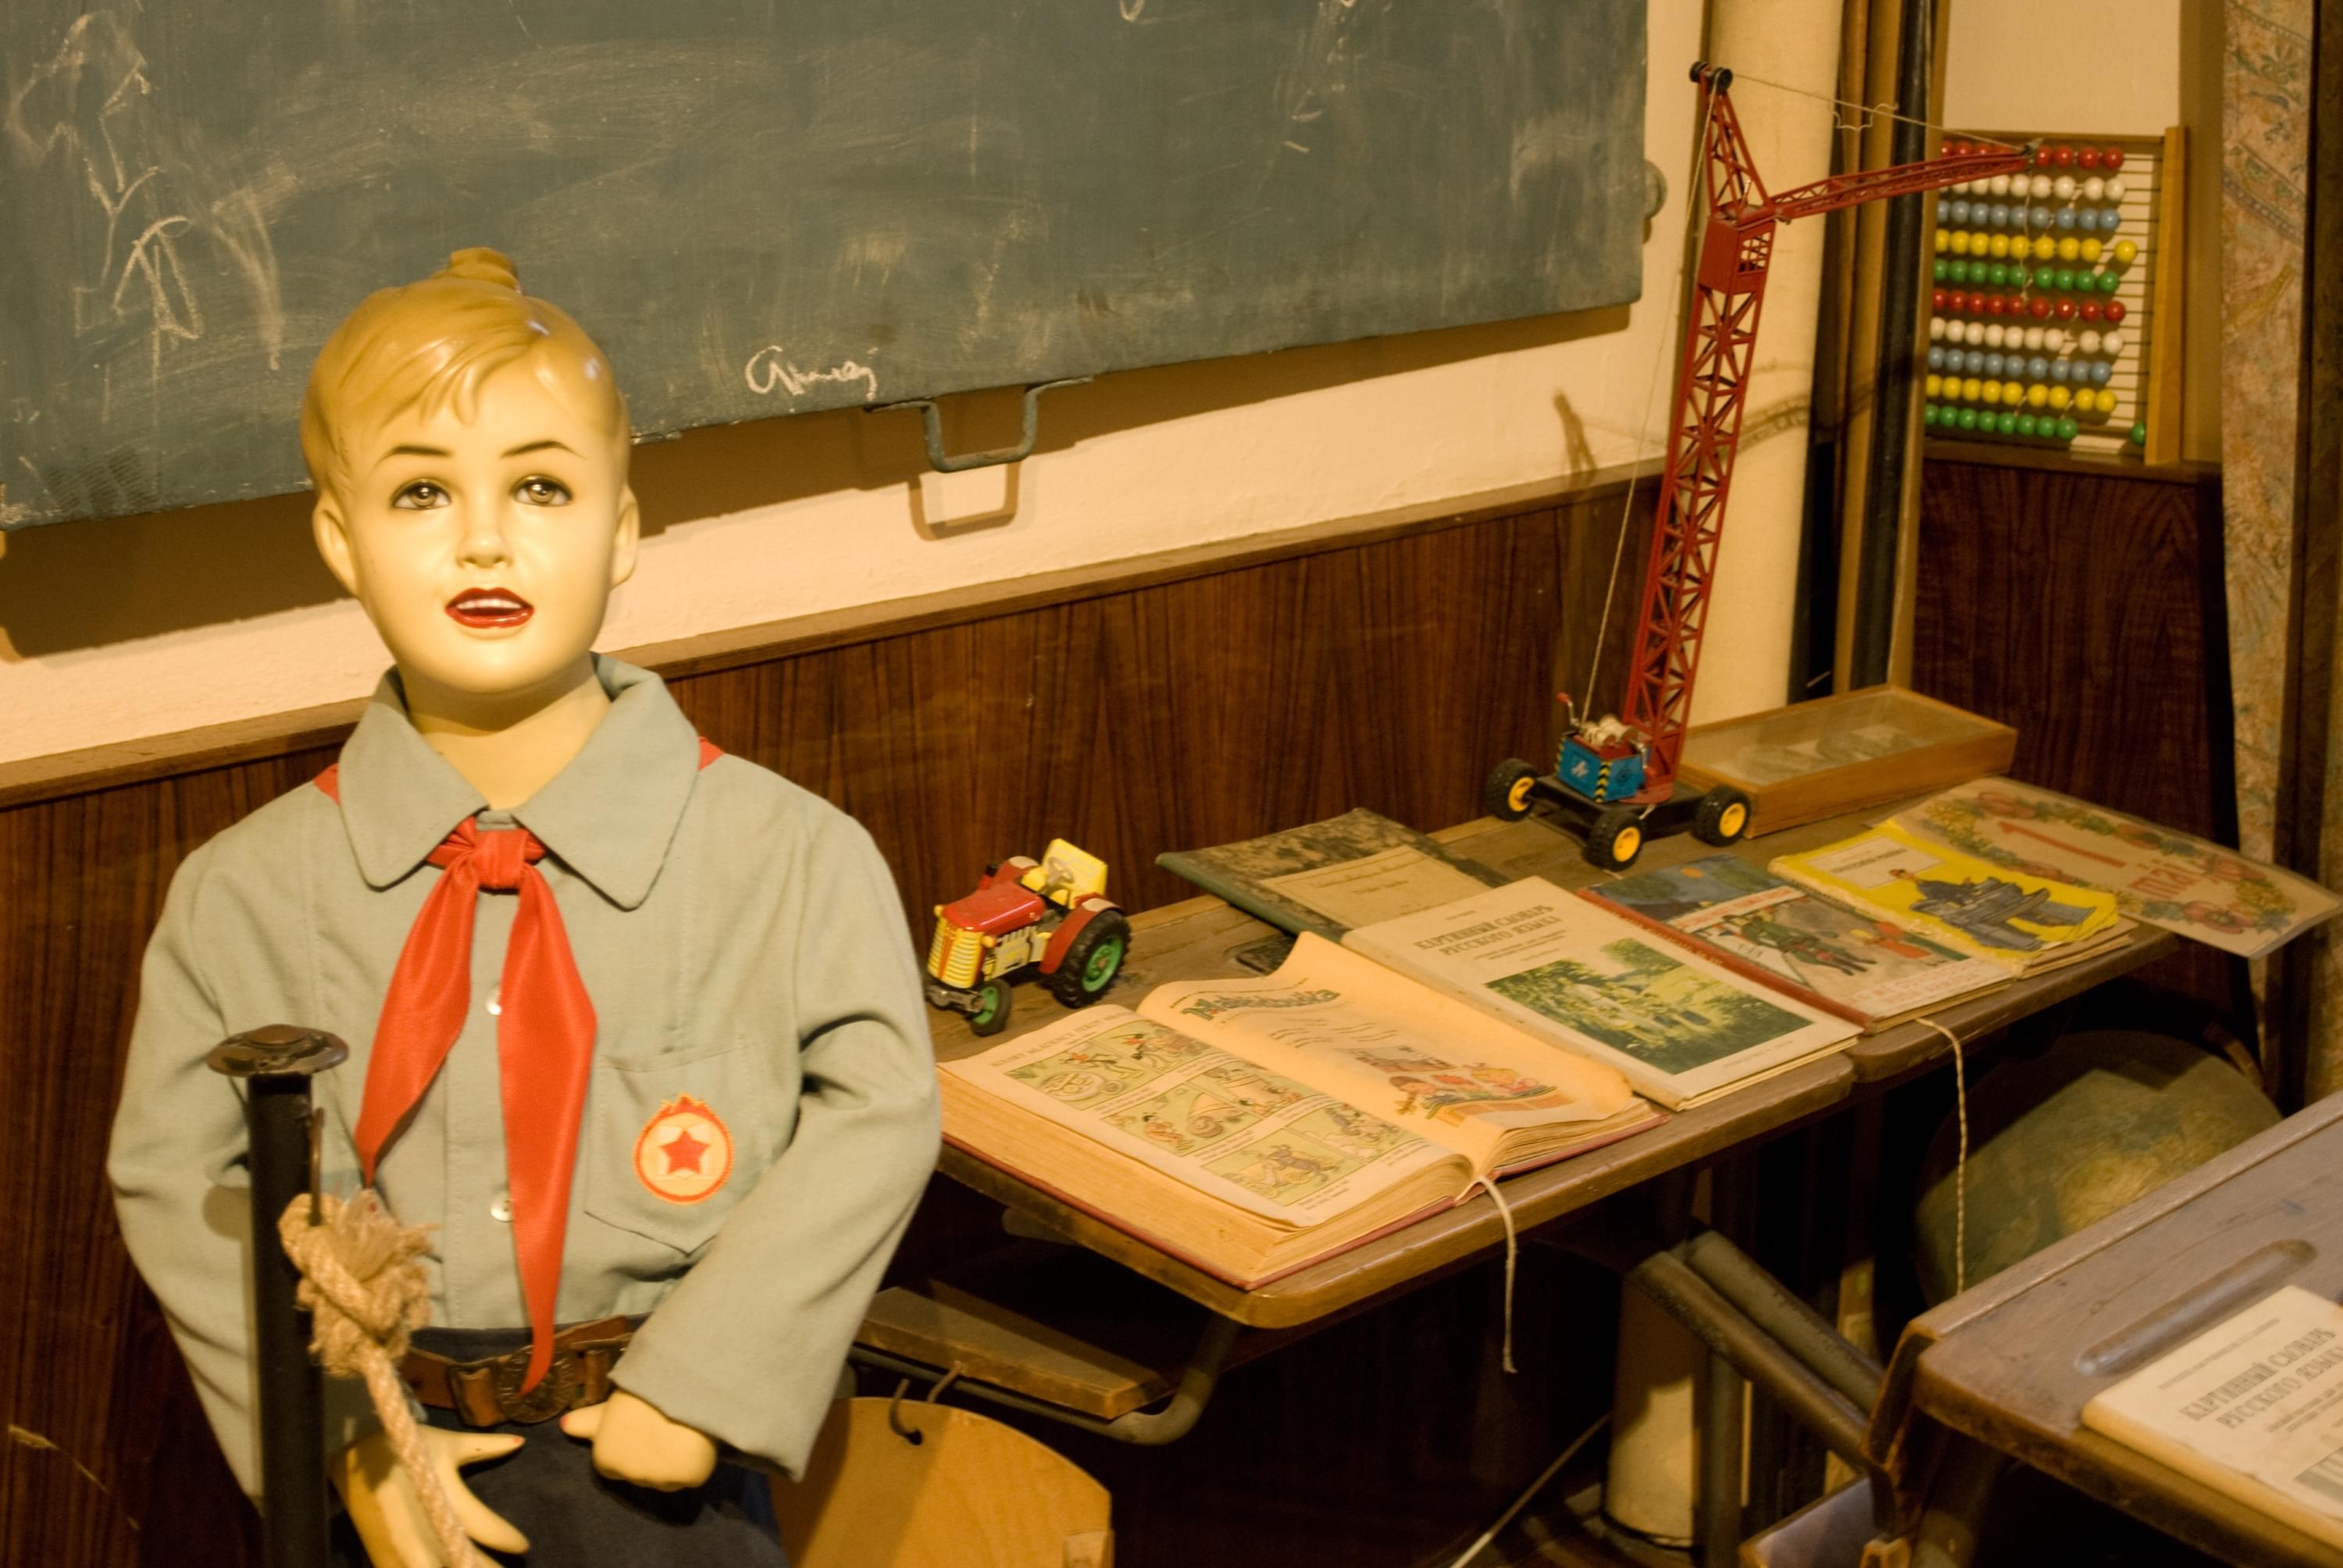 A plastic figure of a girl standing in front of a chalkboard dressed in a communist school uniform